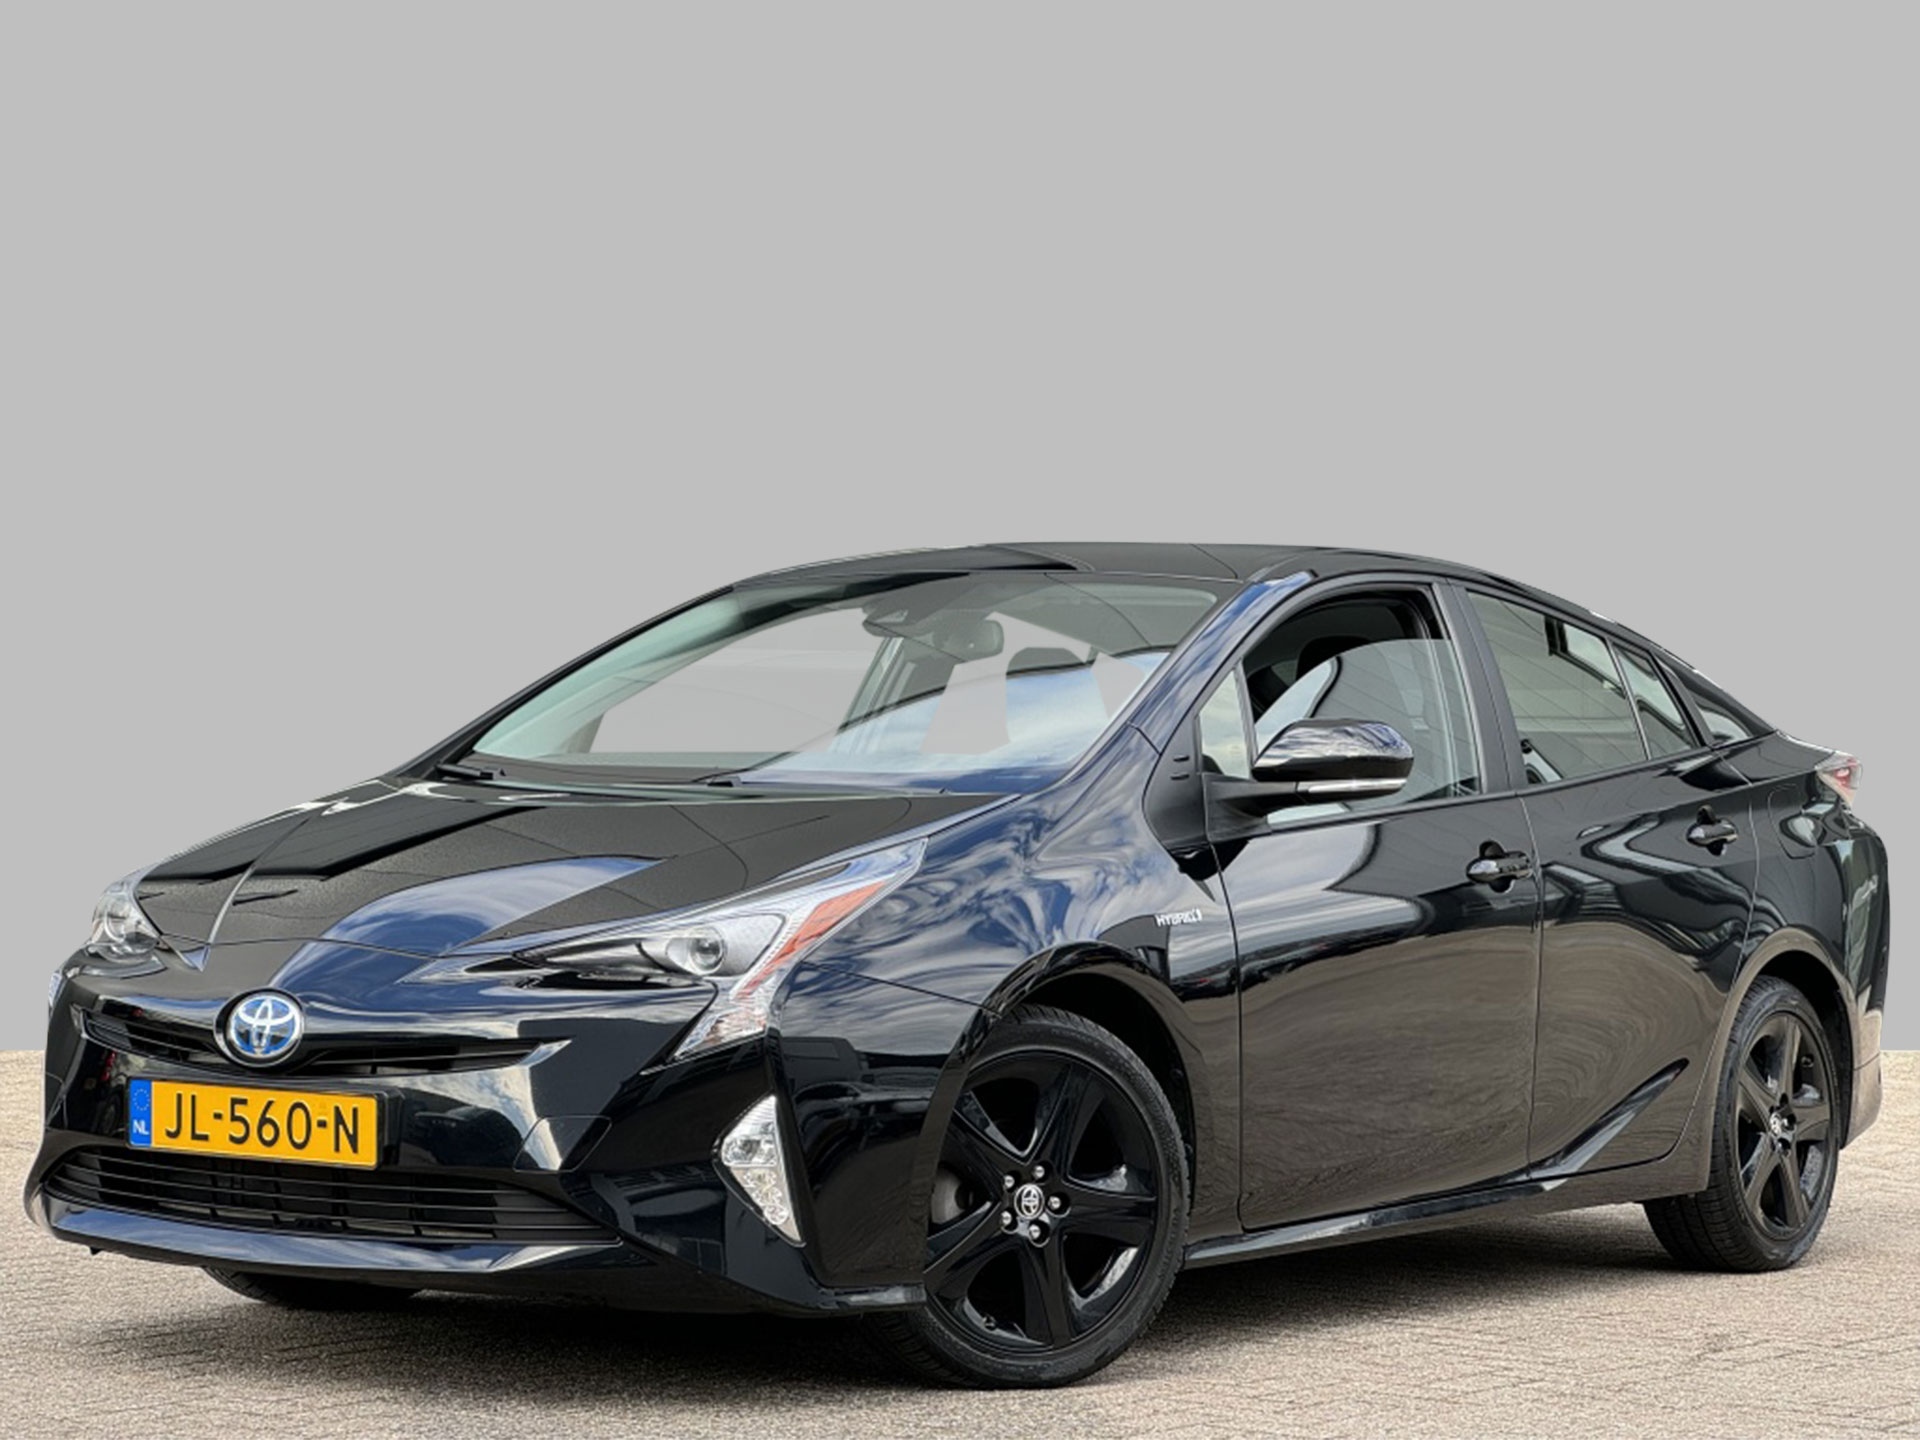 Toyota Prius 1.8 First Edition NL Trekhaak Clima Cruise PDC HUD Stoelverw. bij viaBOVAG.nl